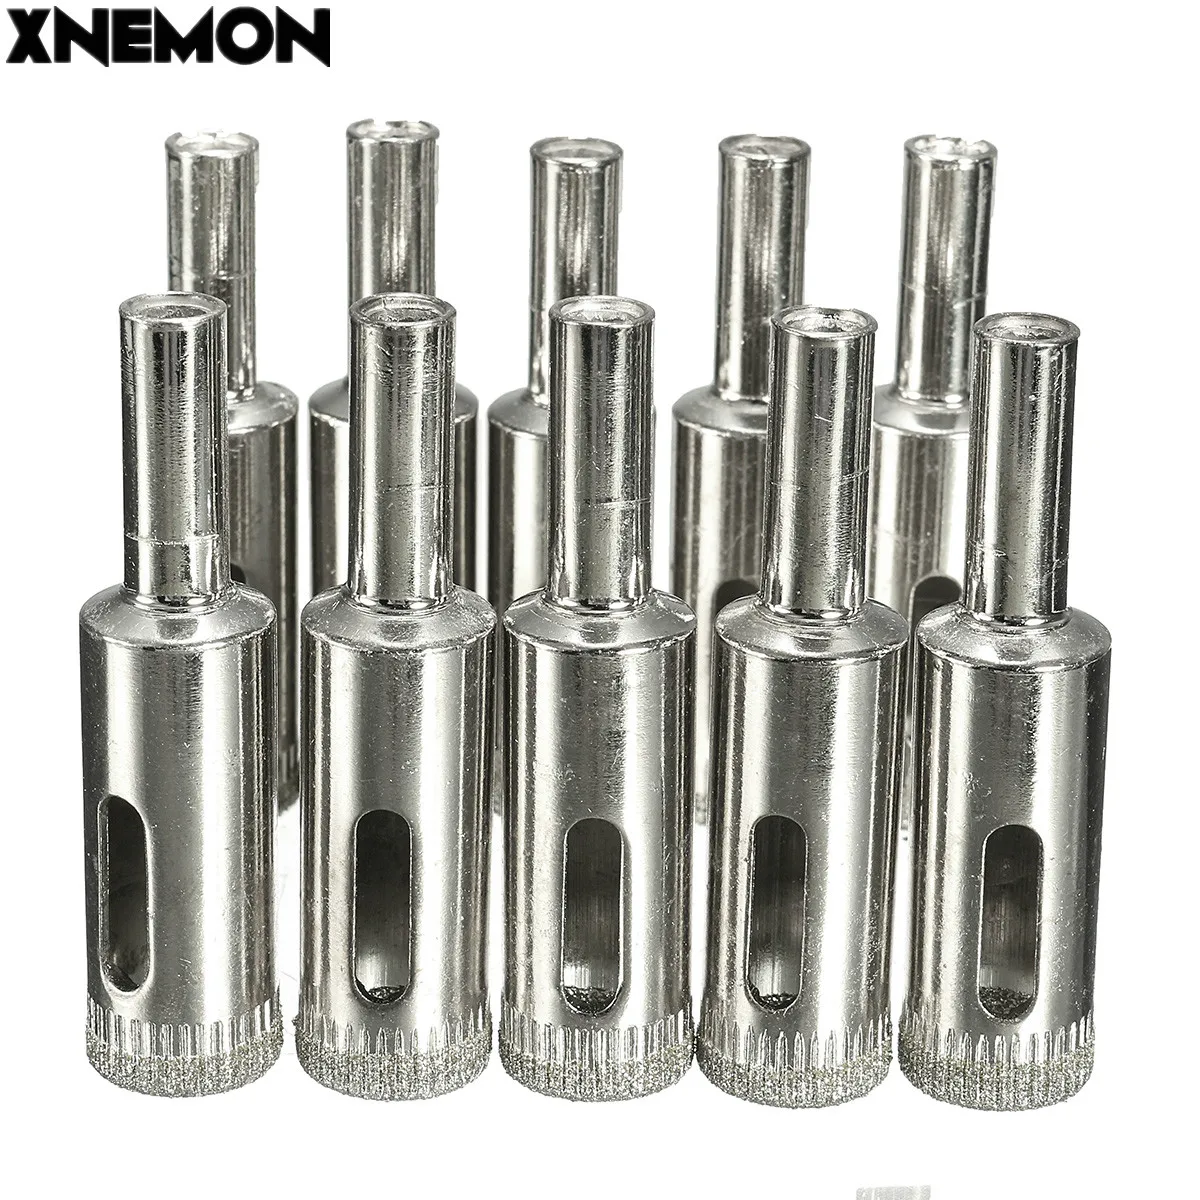 

XNEMON 10Pcs/Set 13mm 1/2 Inch Diamond Coated Drill Bit Set Tile Marble Glass Ceramic Hole Saw Drilling Bits For Power Tools